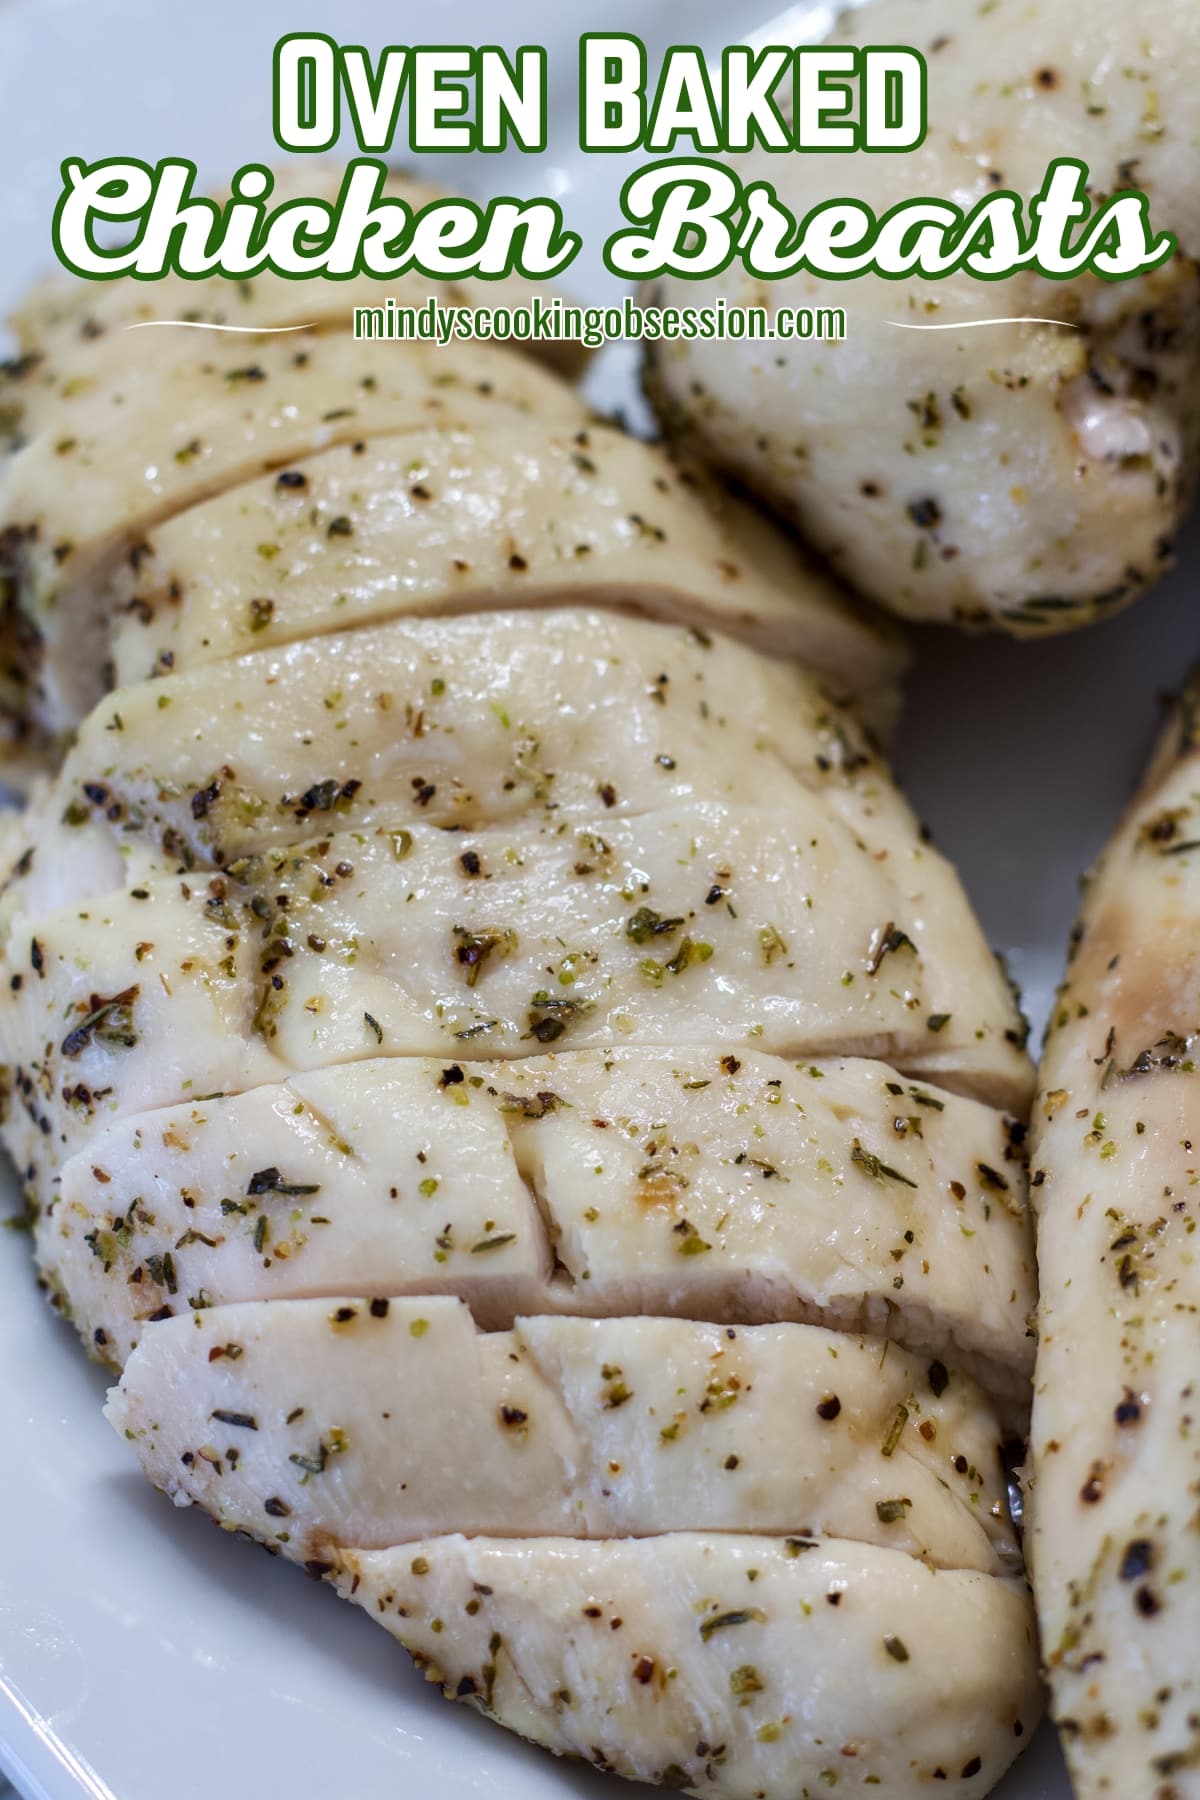 Discover perfect tenderness! Learn how long to bake chicken breast at 350°F (uncovered) for juicy, flavorful results every time. via @mindyscookingobsession